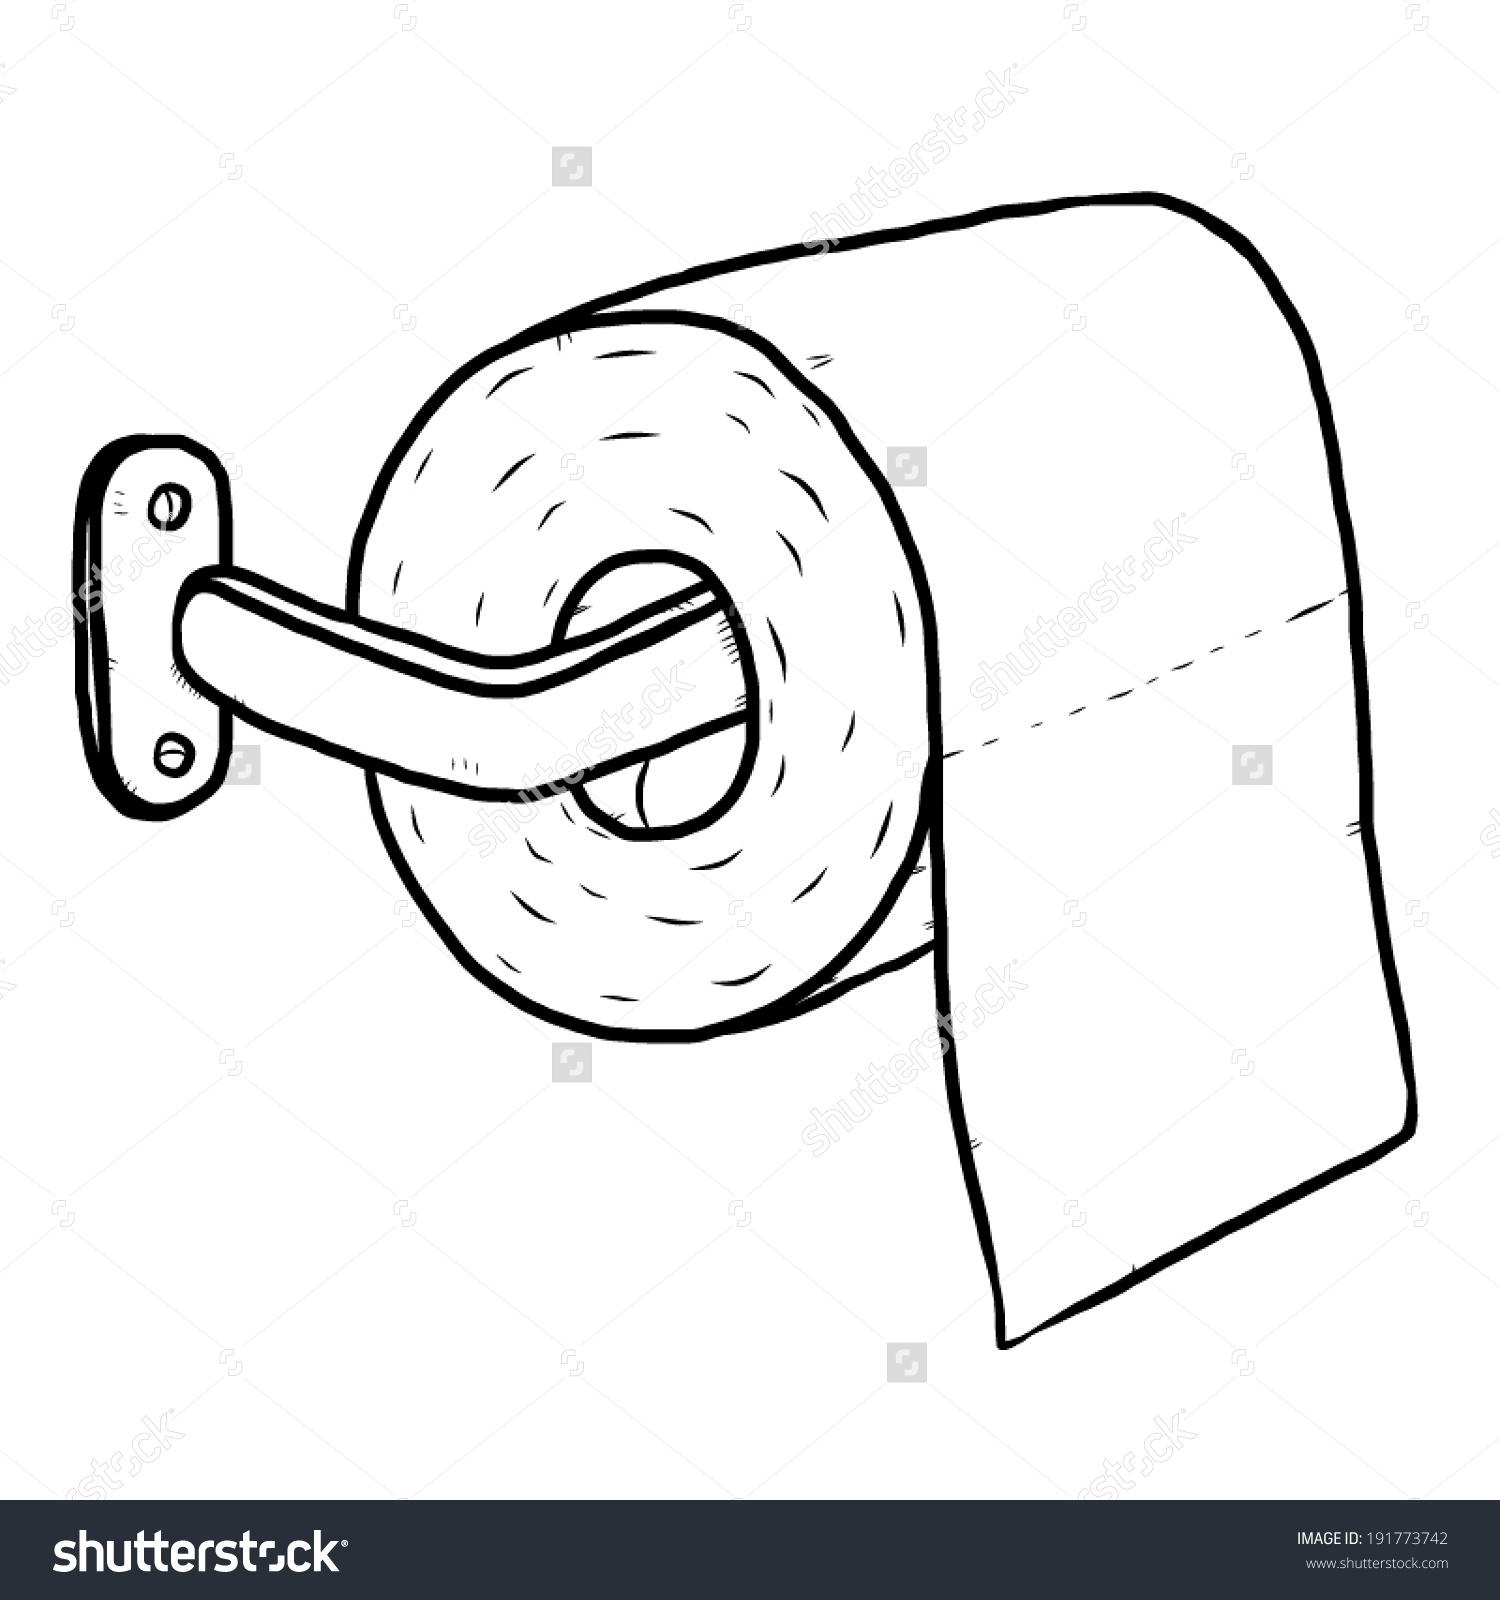 Toilet paper clipart black and white.